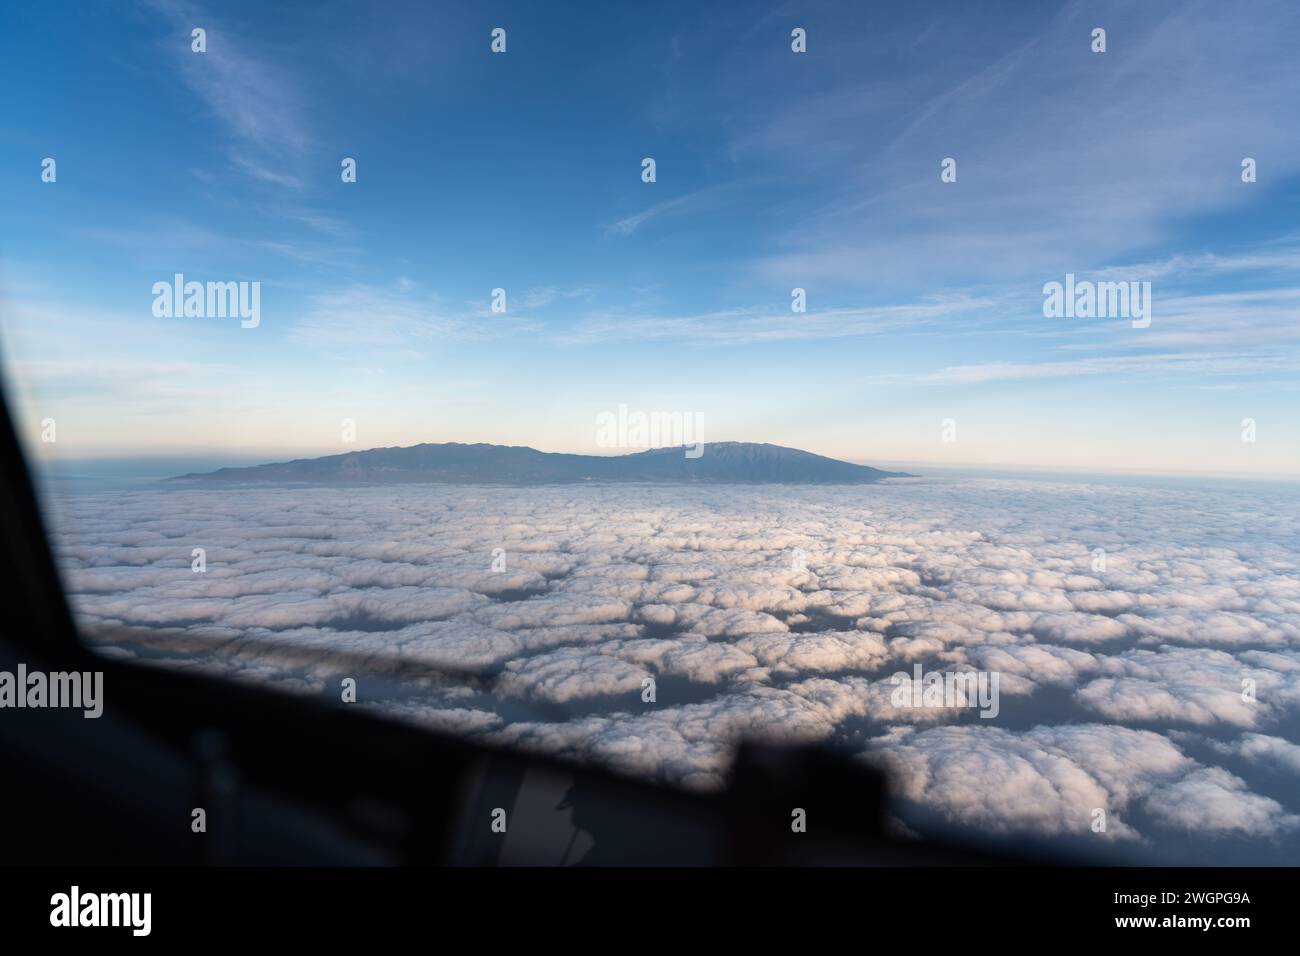 Cockpit view of an aircraft in flight over the clouds Stock Photo